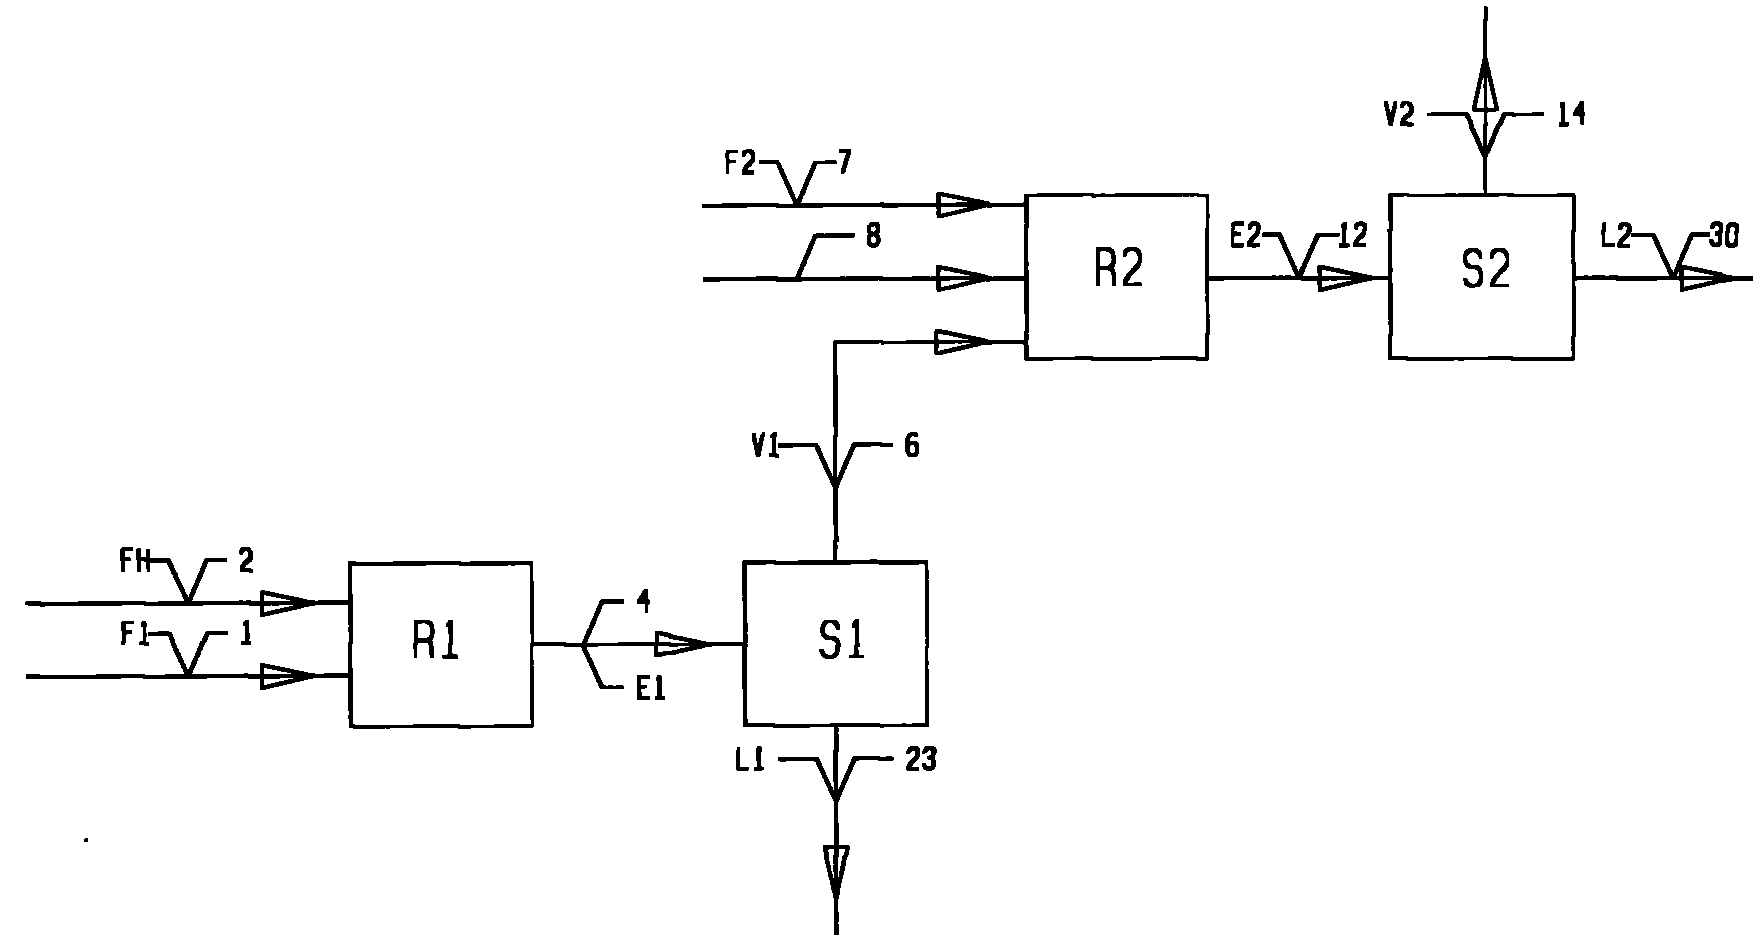 Hydrocarbon hydrogenation conversion process combined method